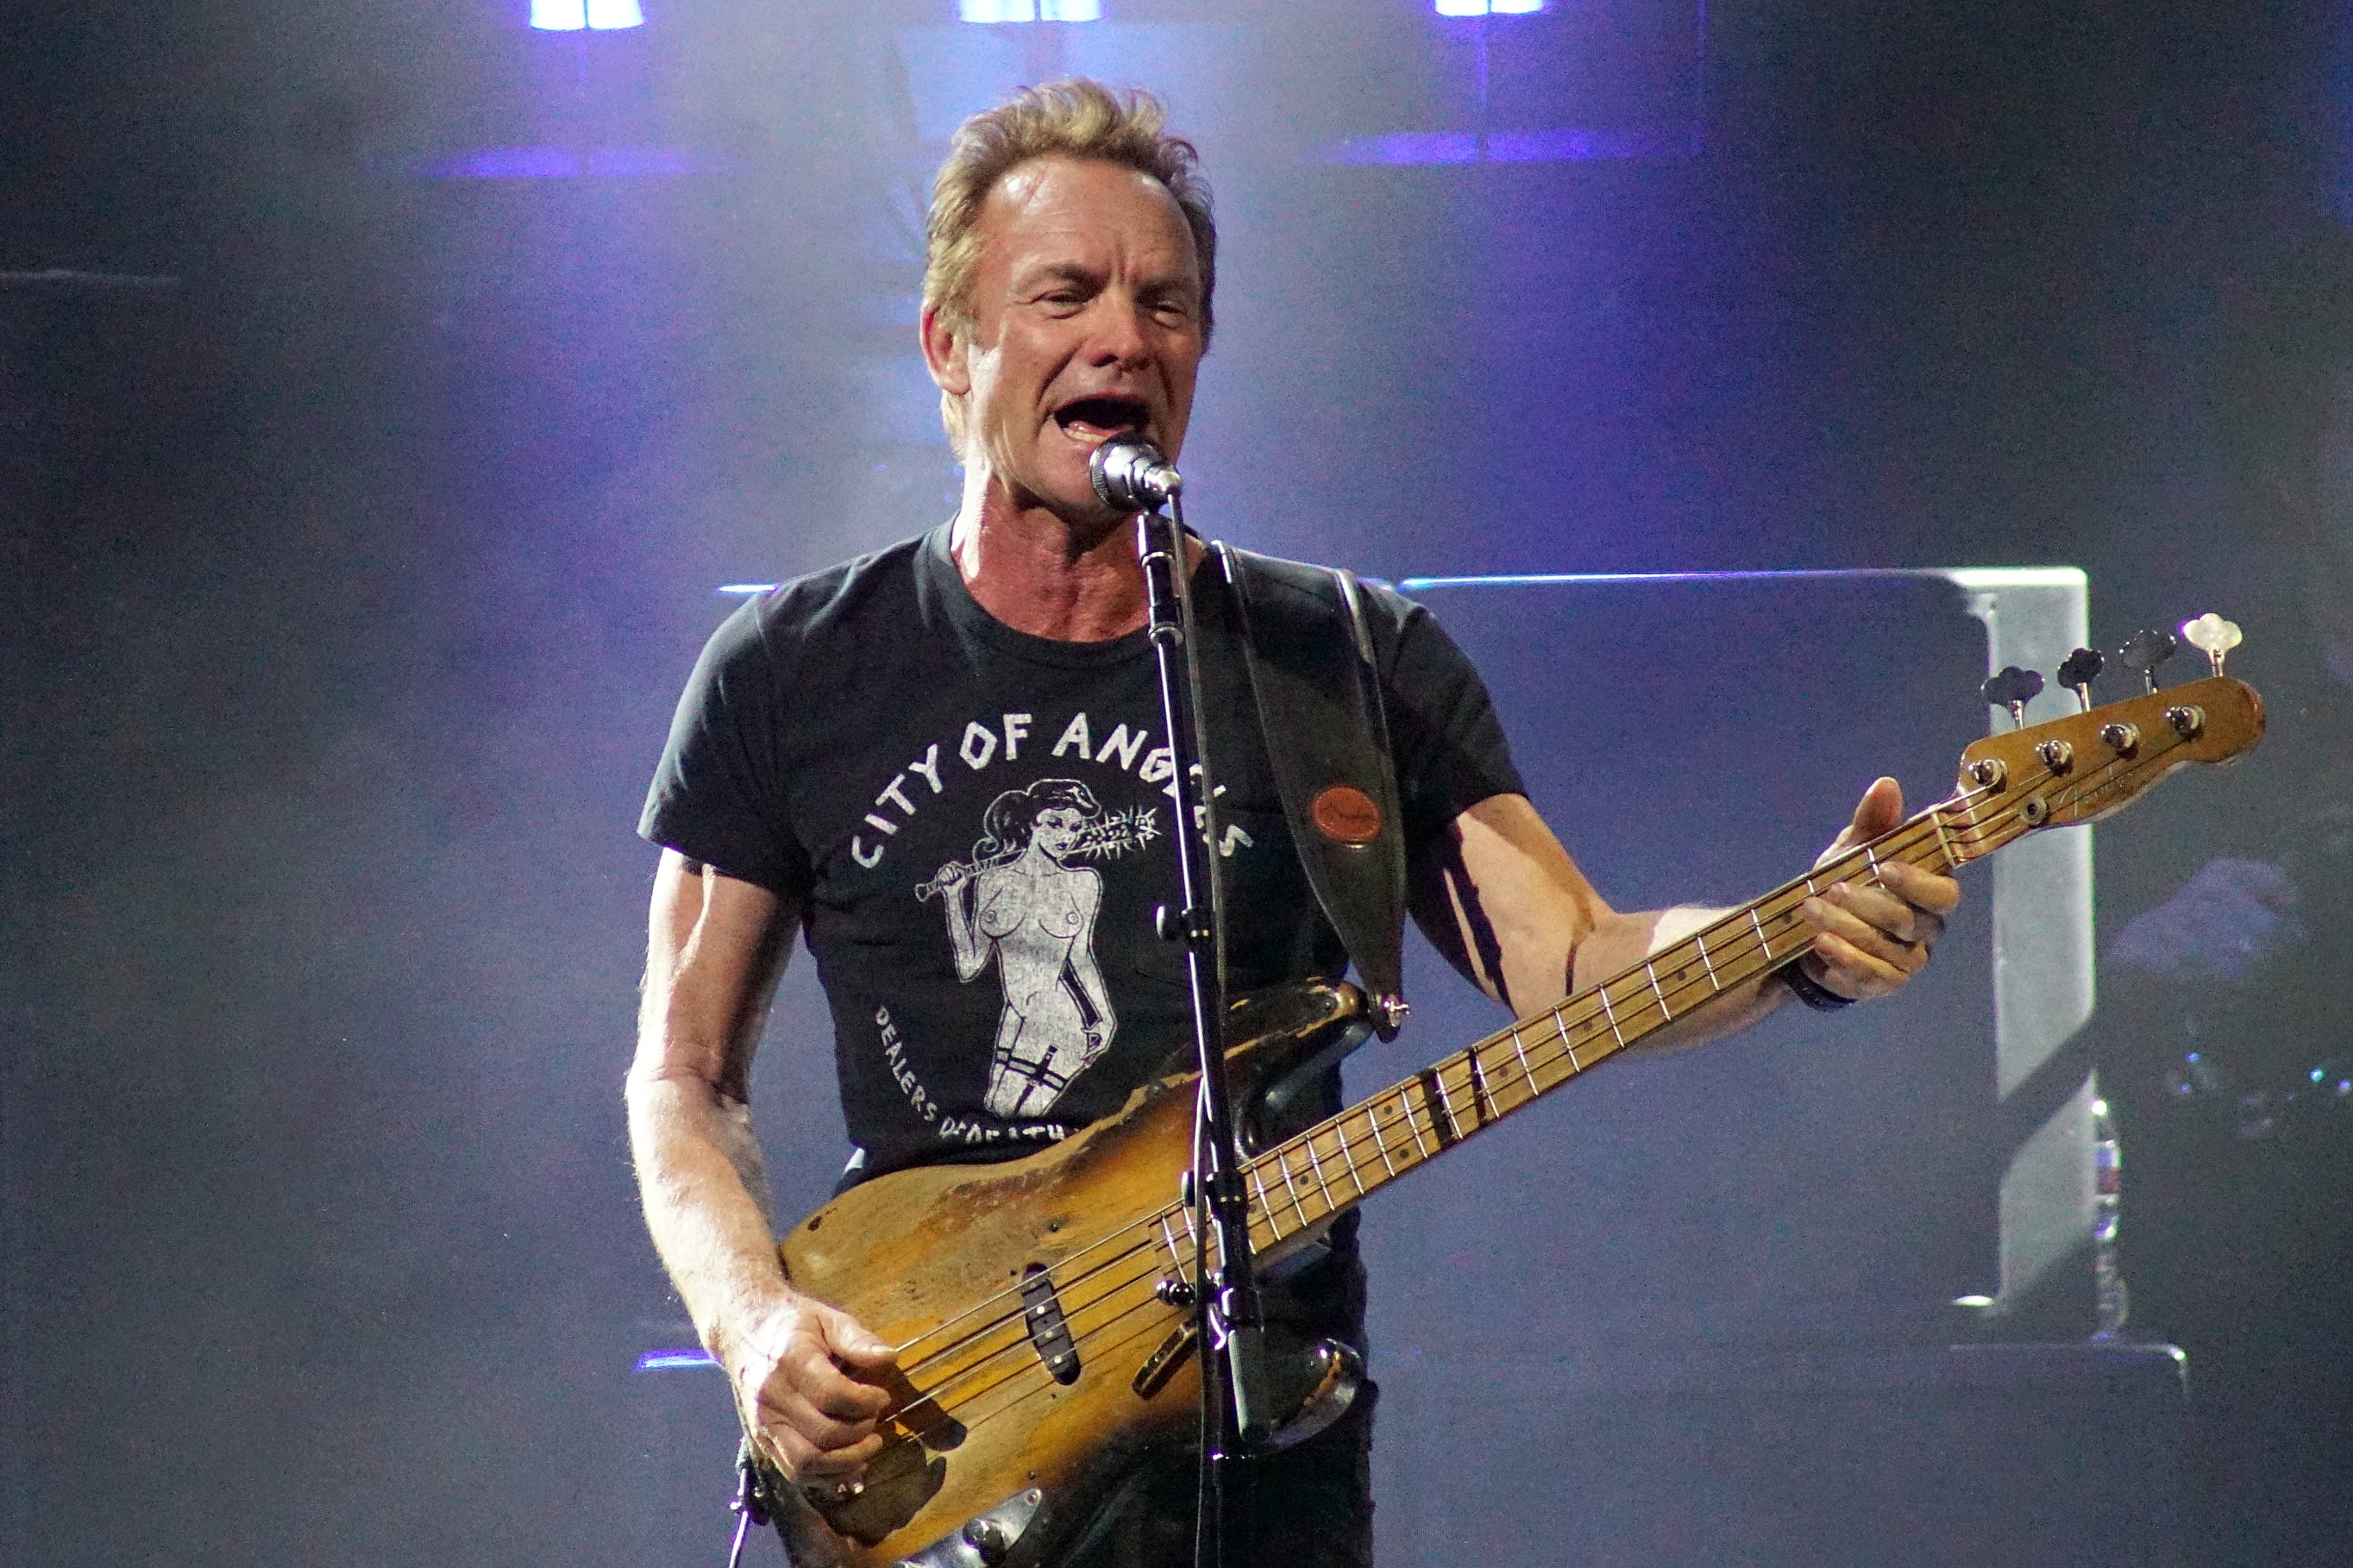 Sting brings worldly charm to Kansas City | I Heart Local Music2728 x 1818